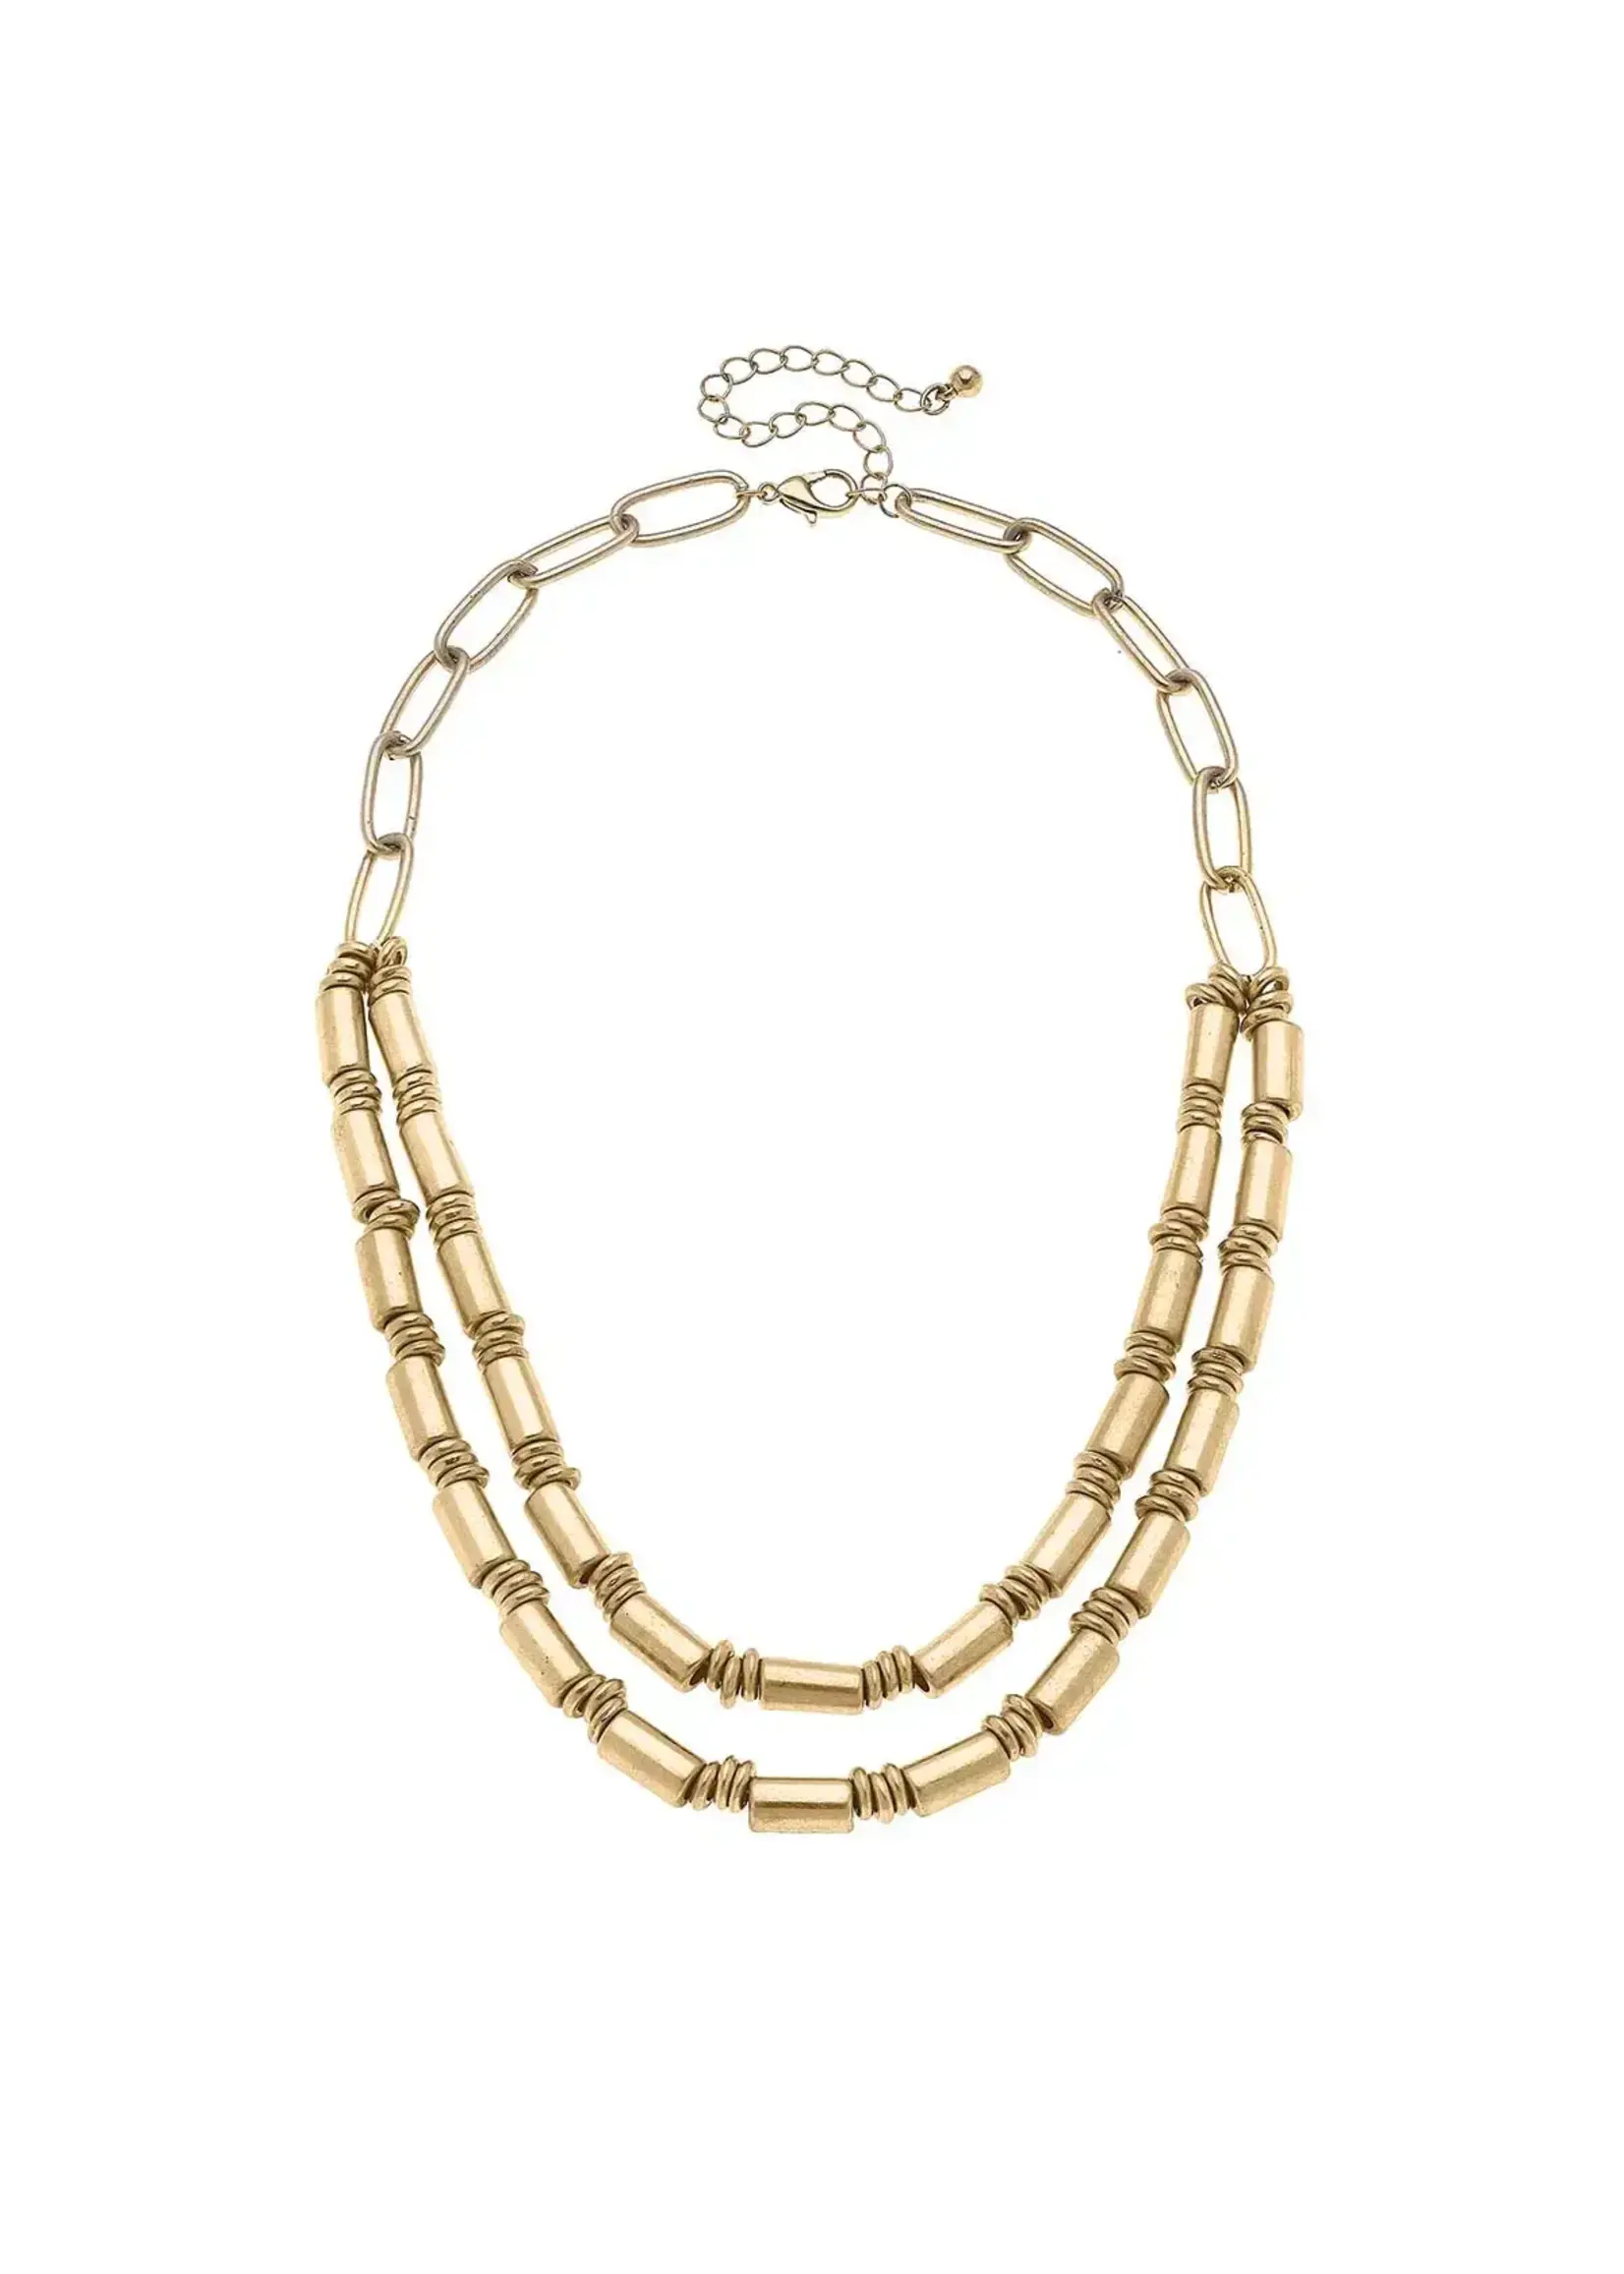 Canvas Harley Layered Metal Bead Necklace in Worn Gold